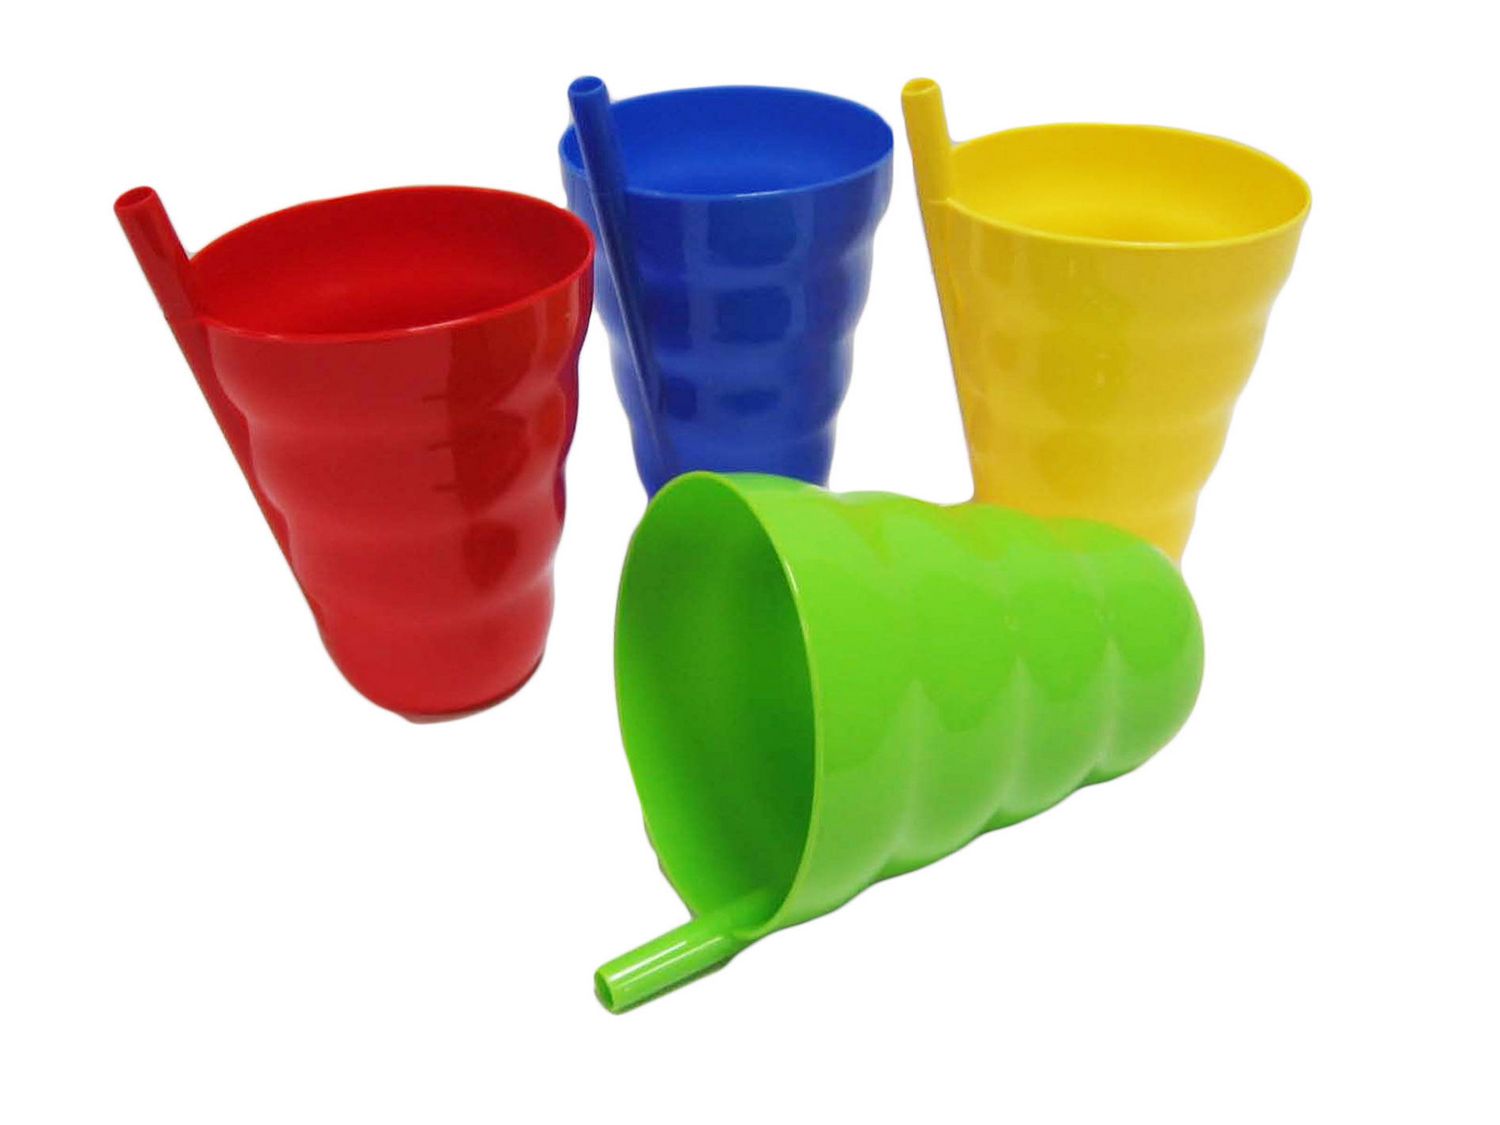 Cups - Shop for Cups & Straws Products Online